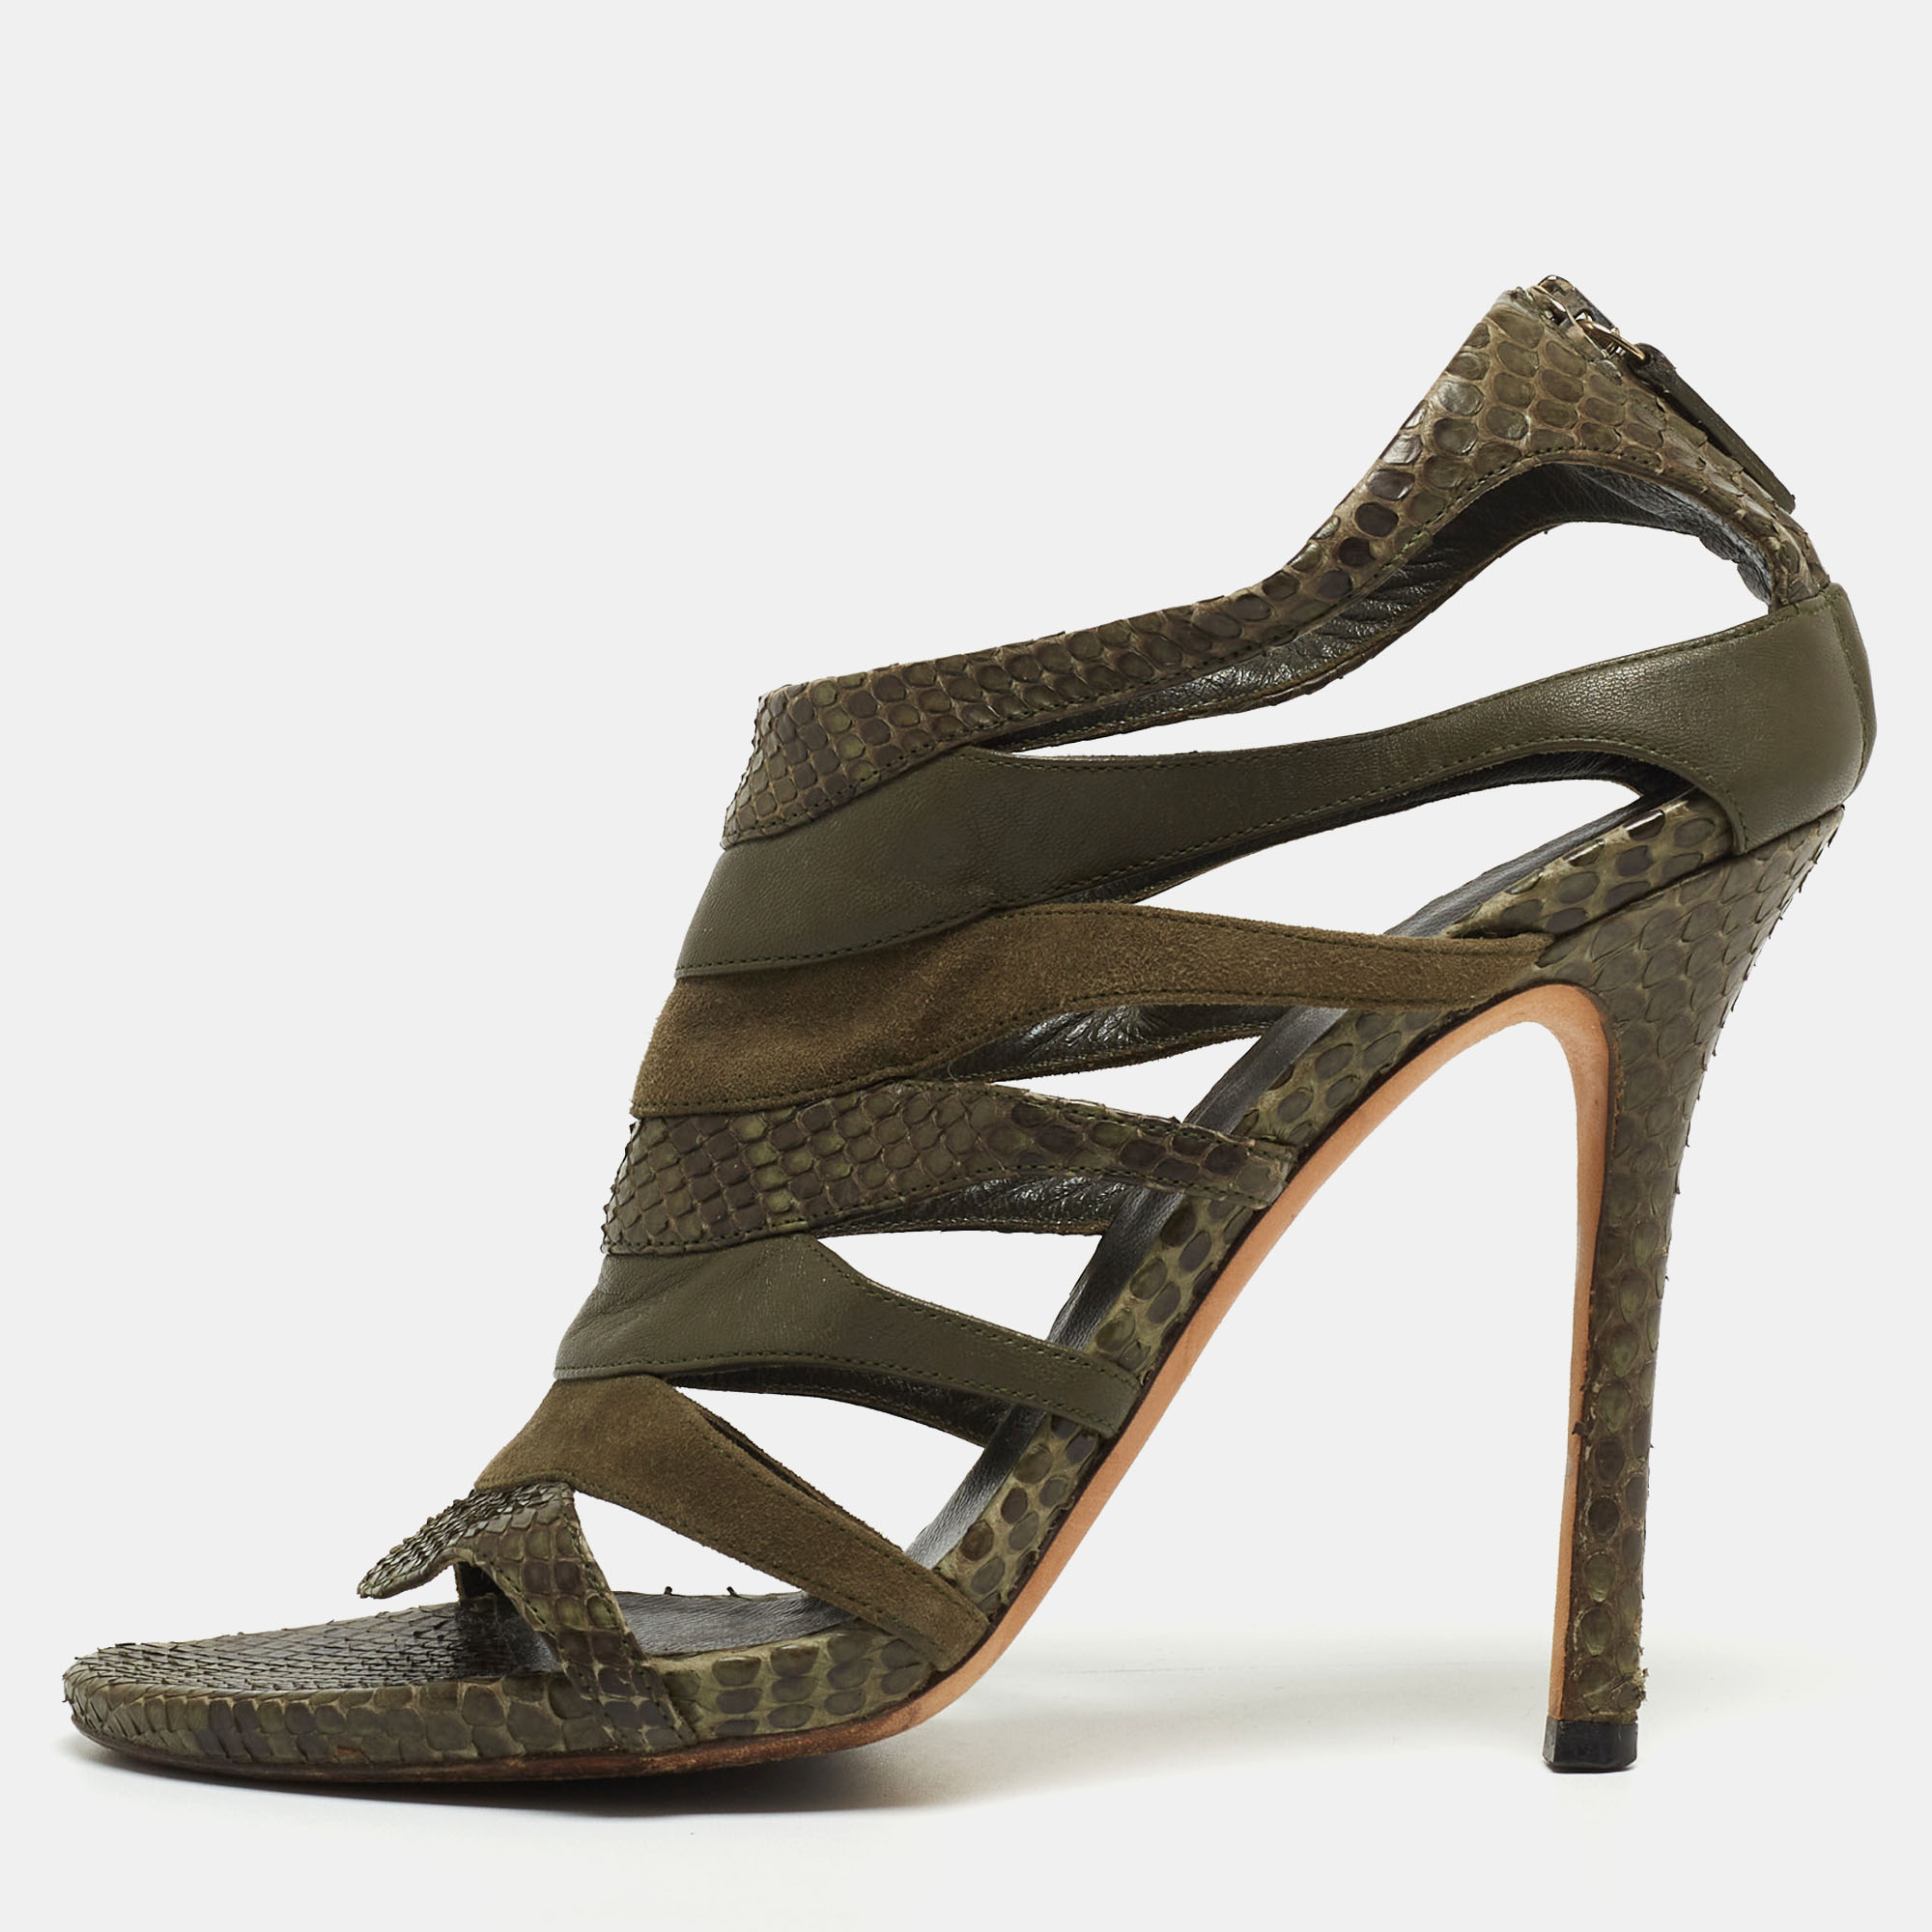 Gucci green python and suede ankle strap sandals size 38